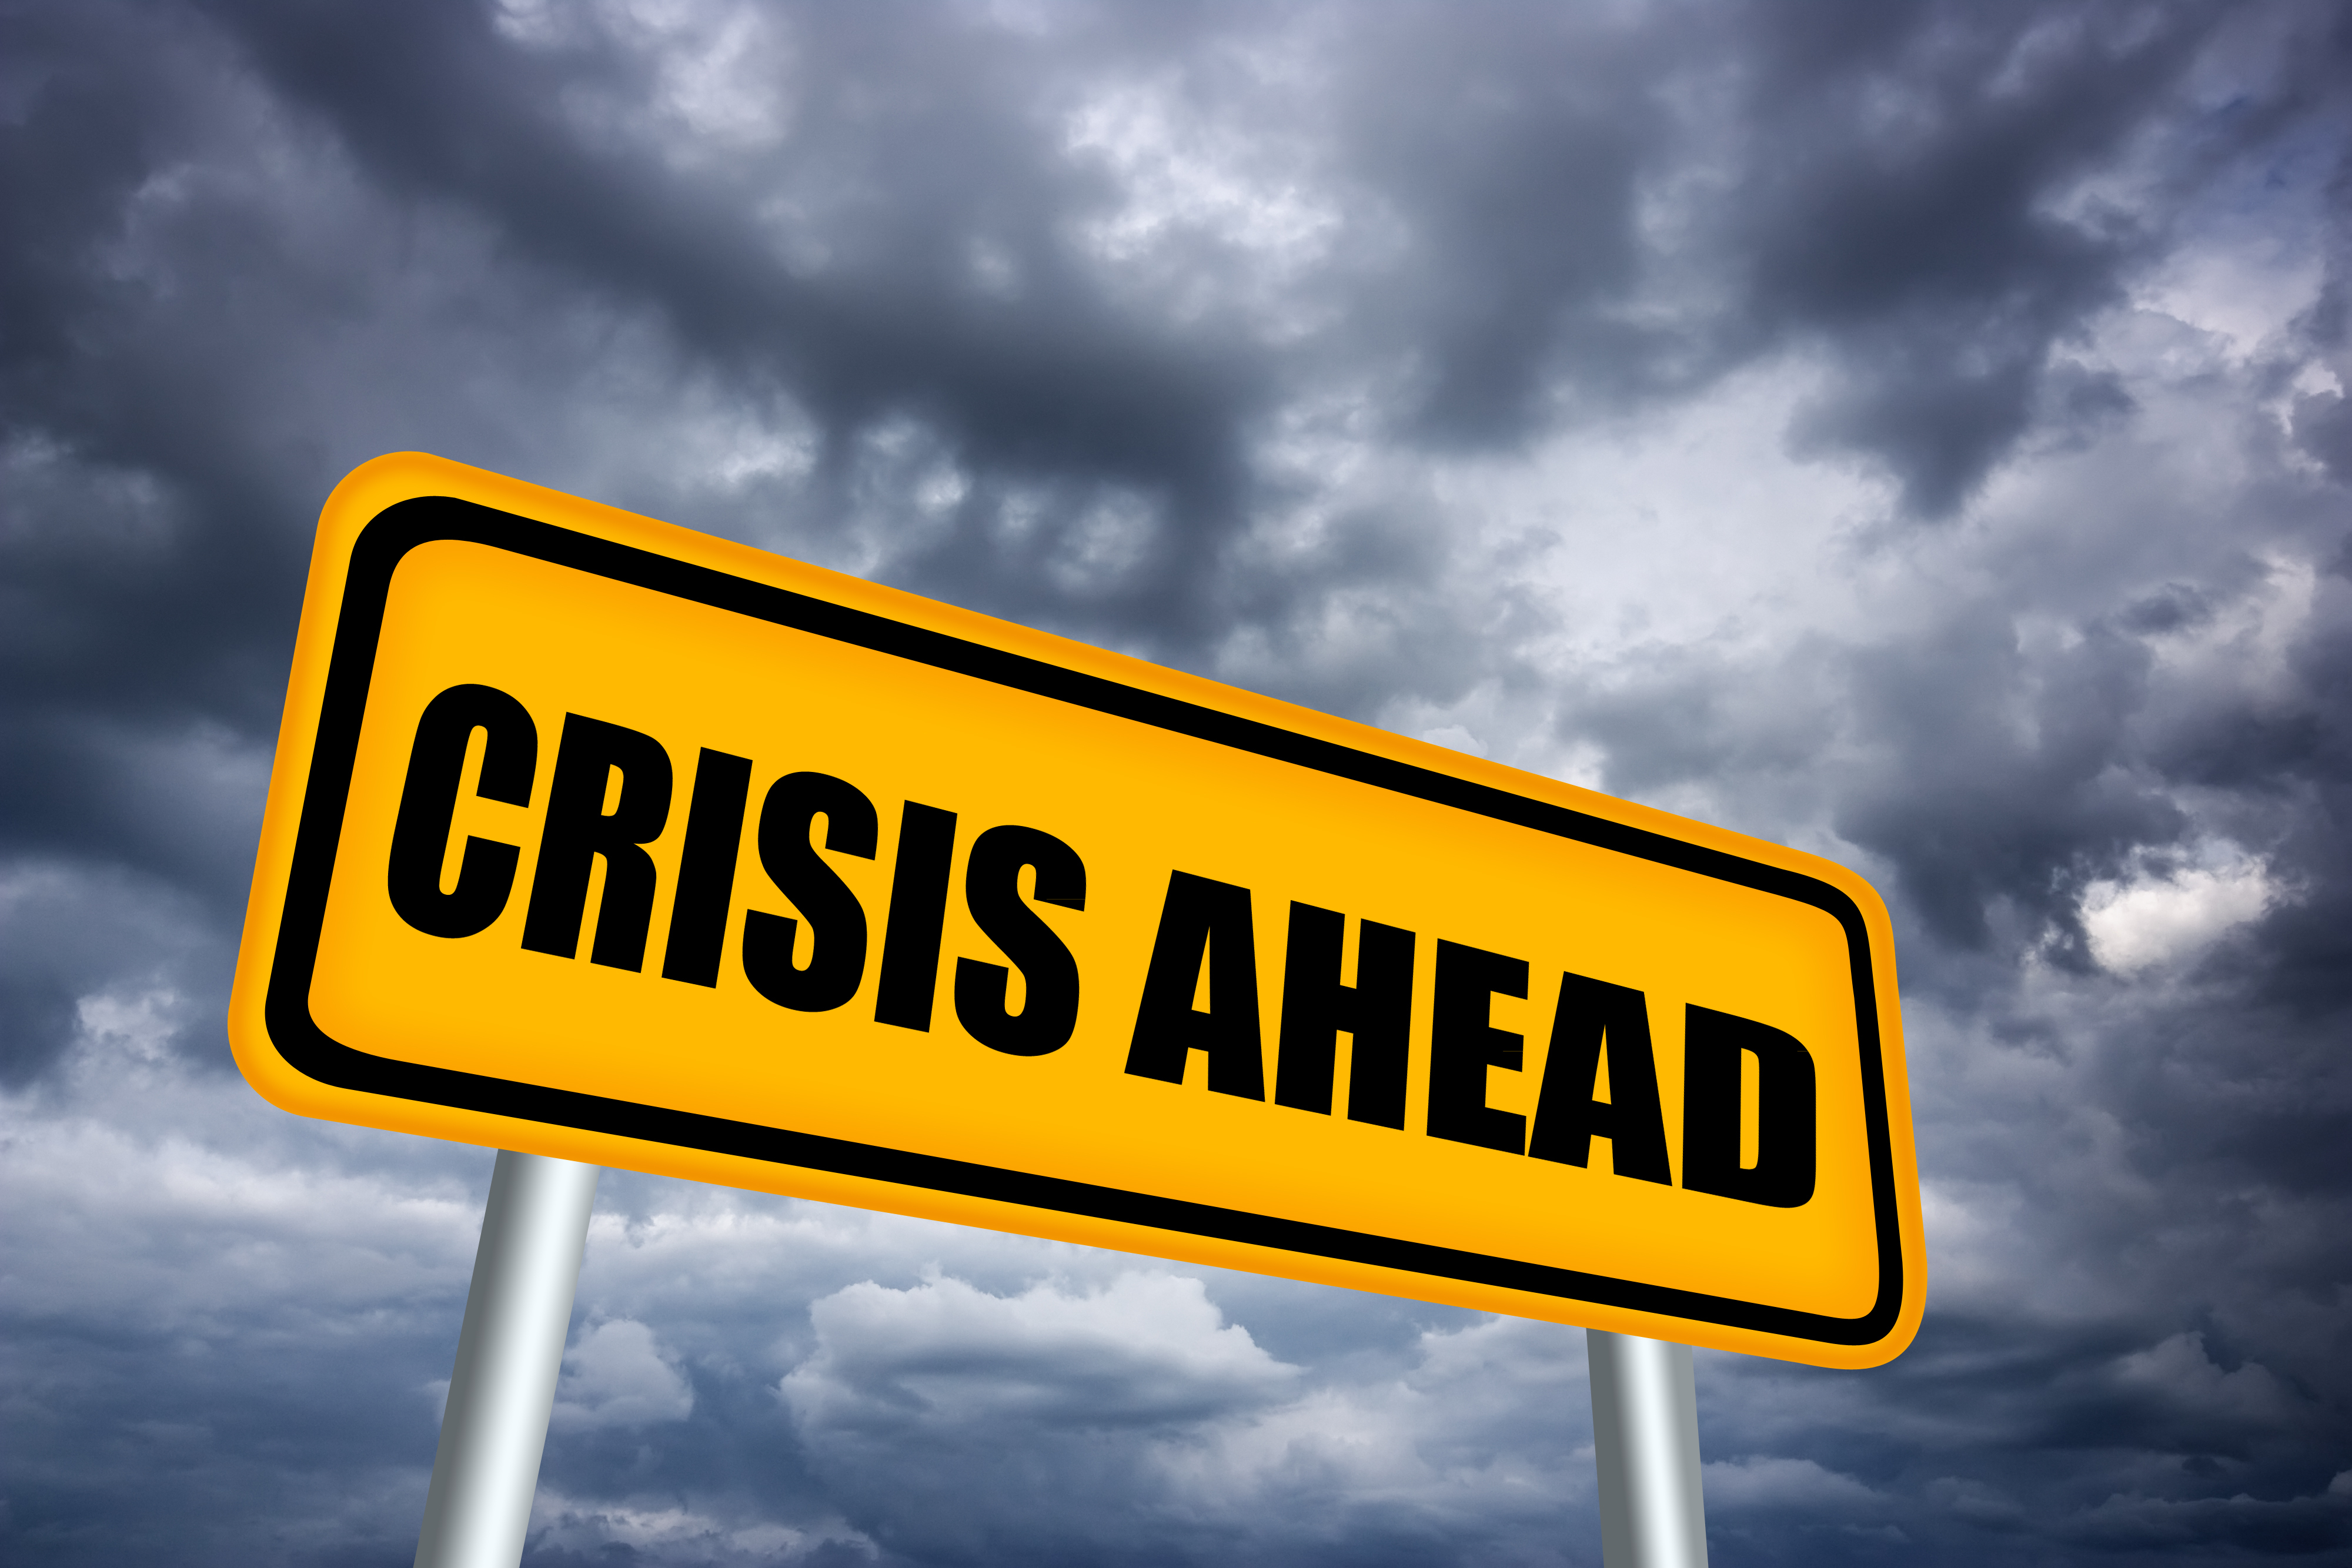 Theology in Crisis - A Clear Lens